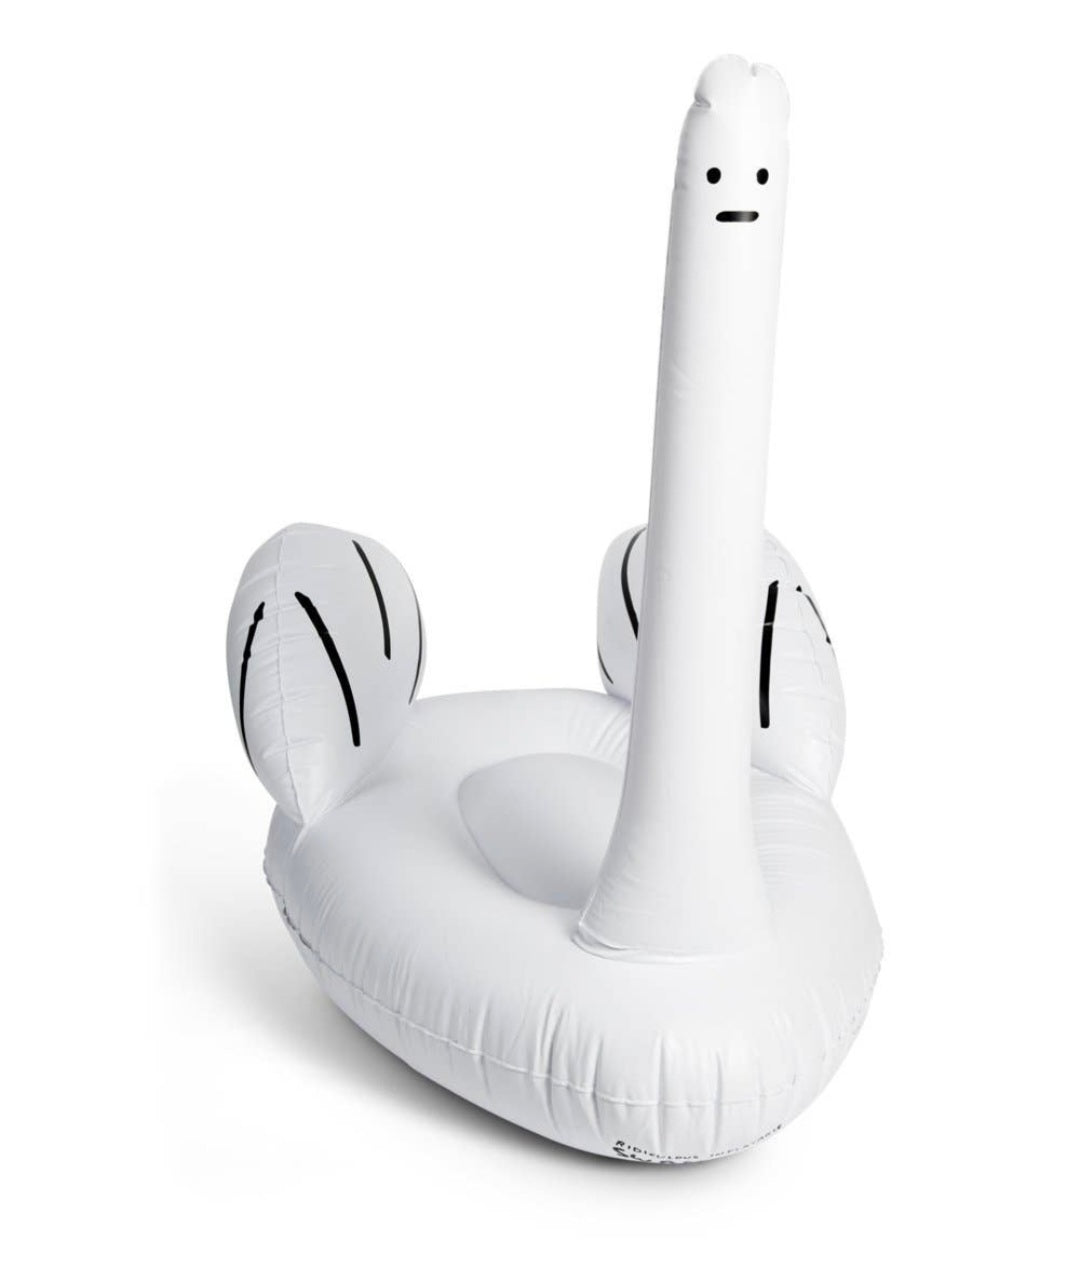 Ridiculous Inflatable Swan-Thing x David Shrigley